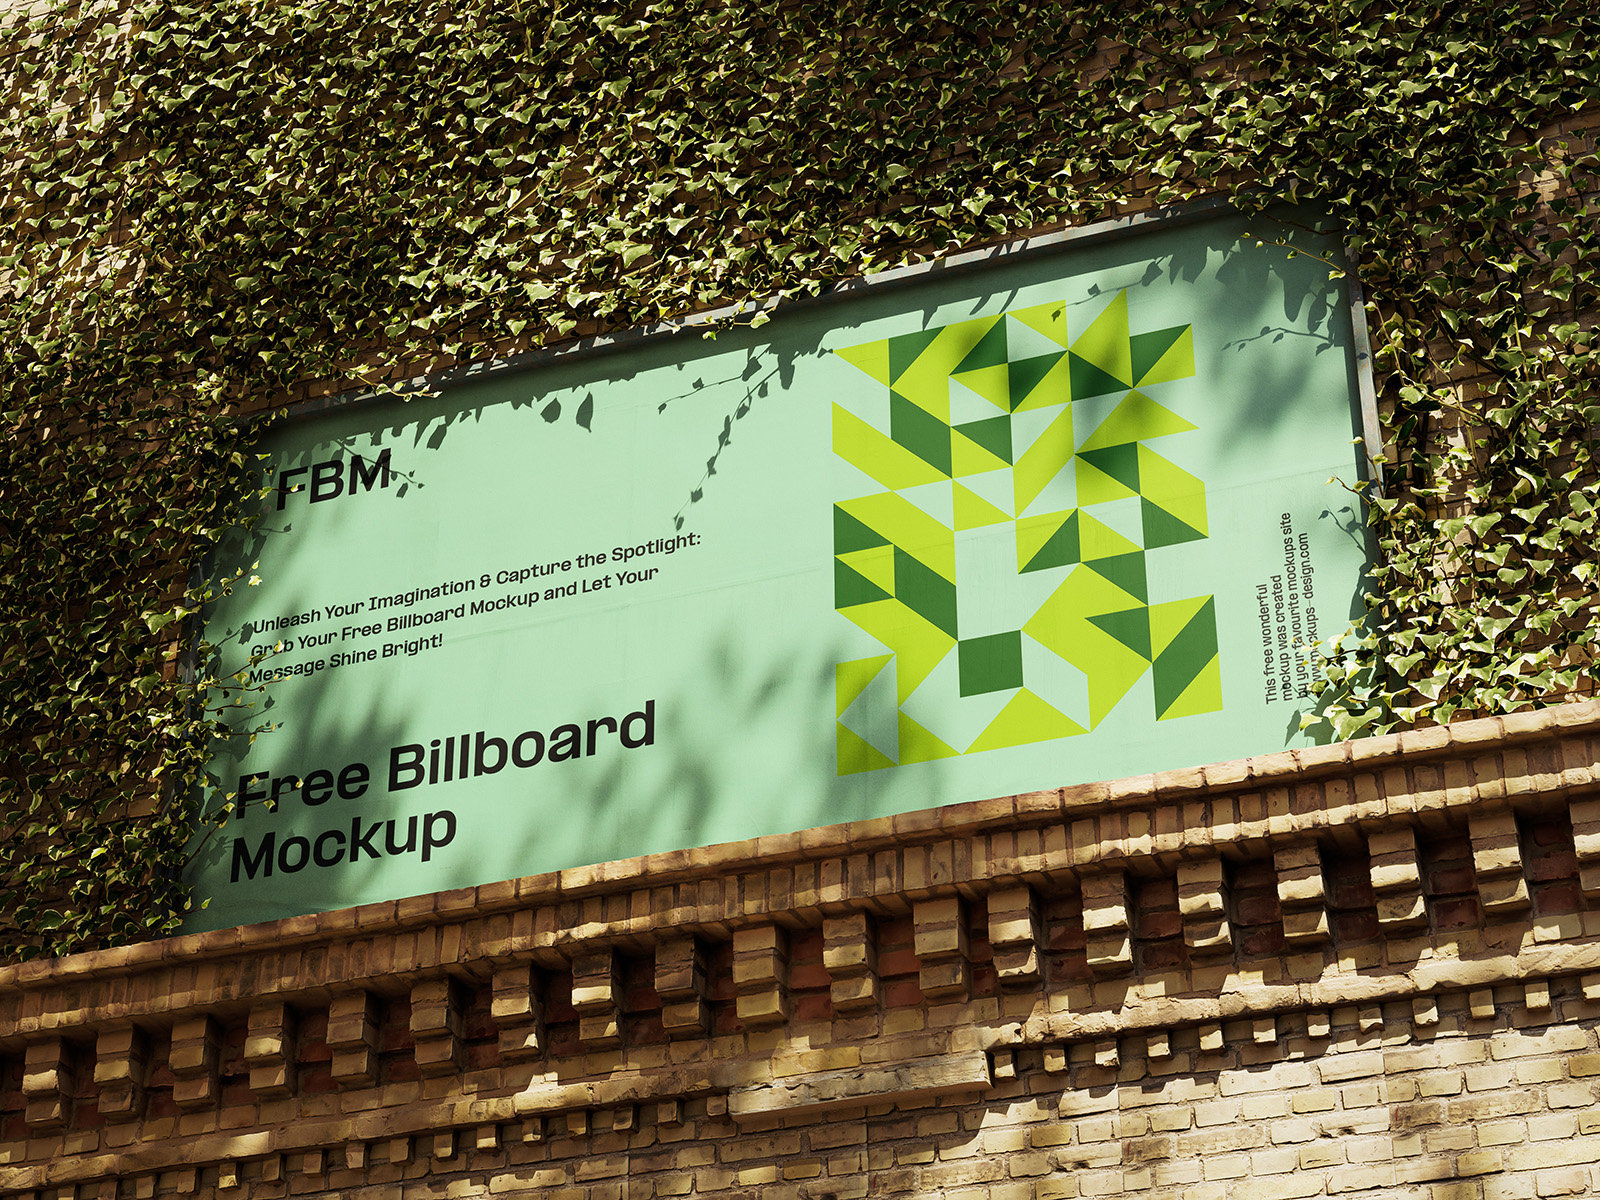 3 Billboard Mockup Covered with Ivy in Different Sights FREE PSD